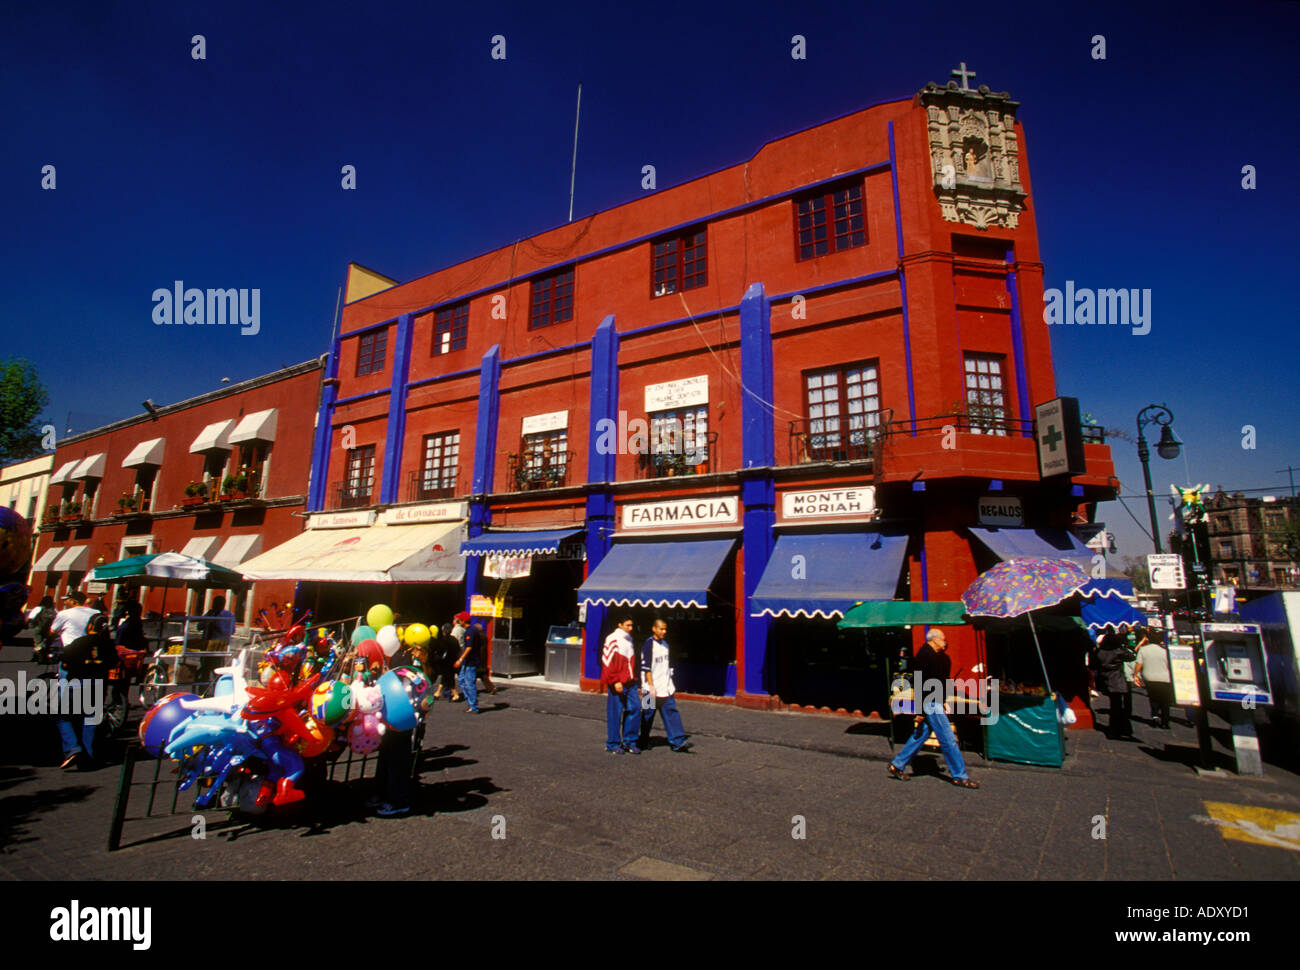 pharmacy, farmacia, opposite Plaza Hidalgo in suburb of Coyoacan in Mexico City in the Federal District in Mexico Stock Photo